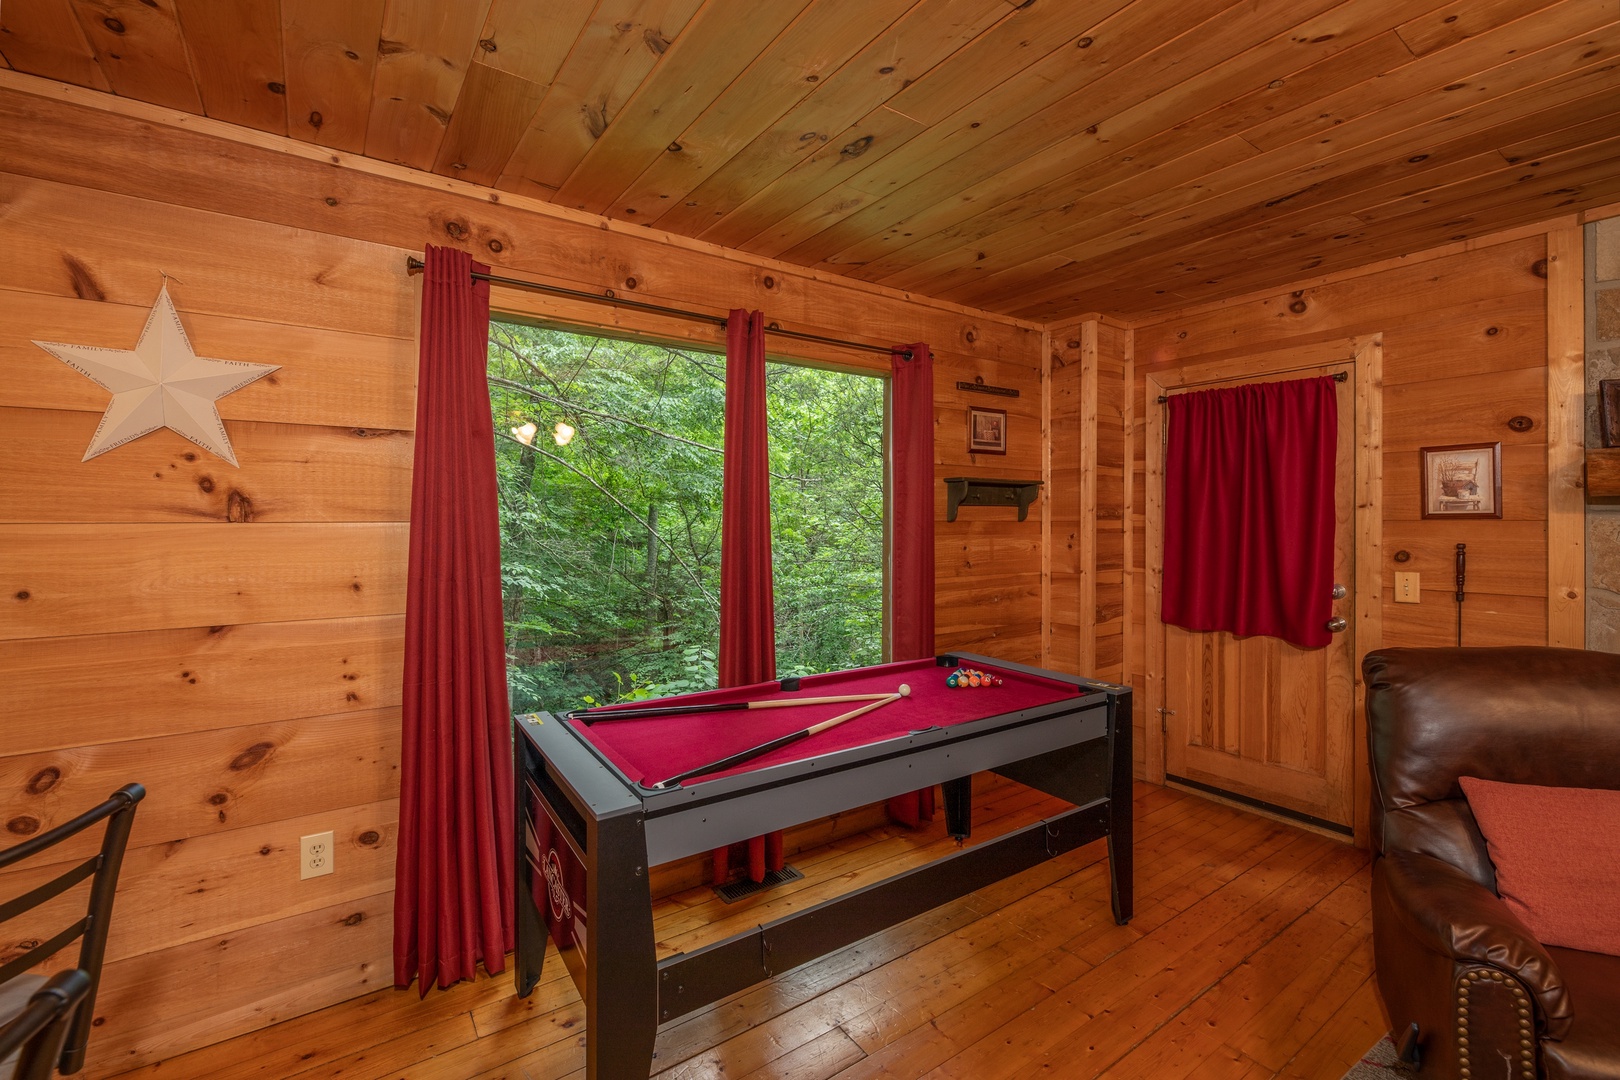 Pool table at Logan's Smoky Den, a 2 bedroom cabin rental located in Pigeon Forge